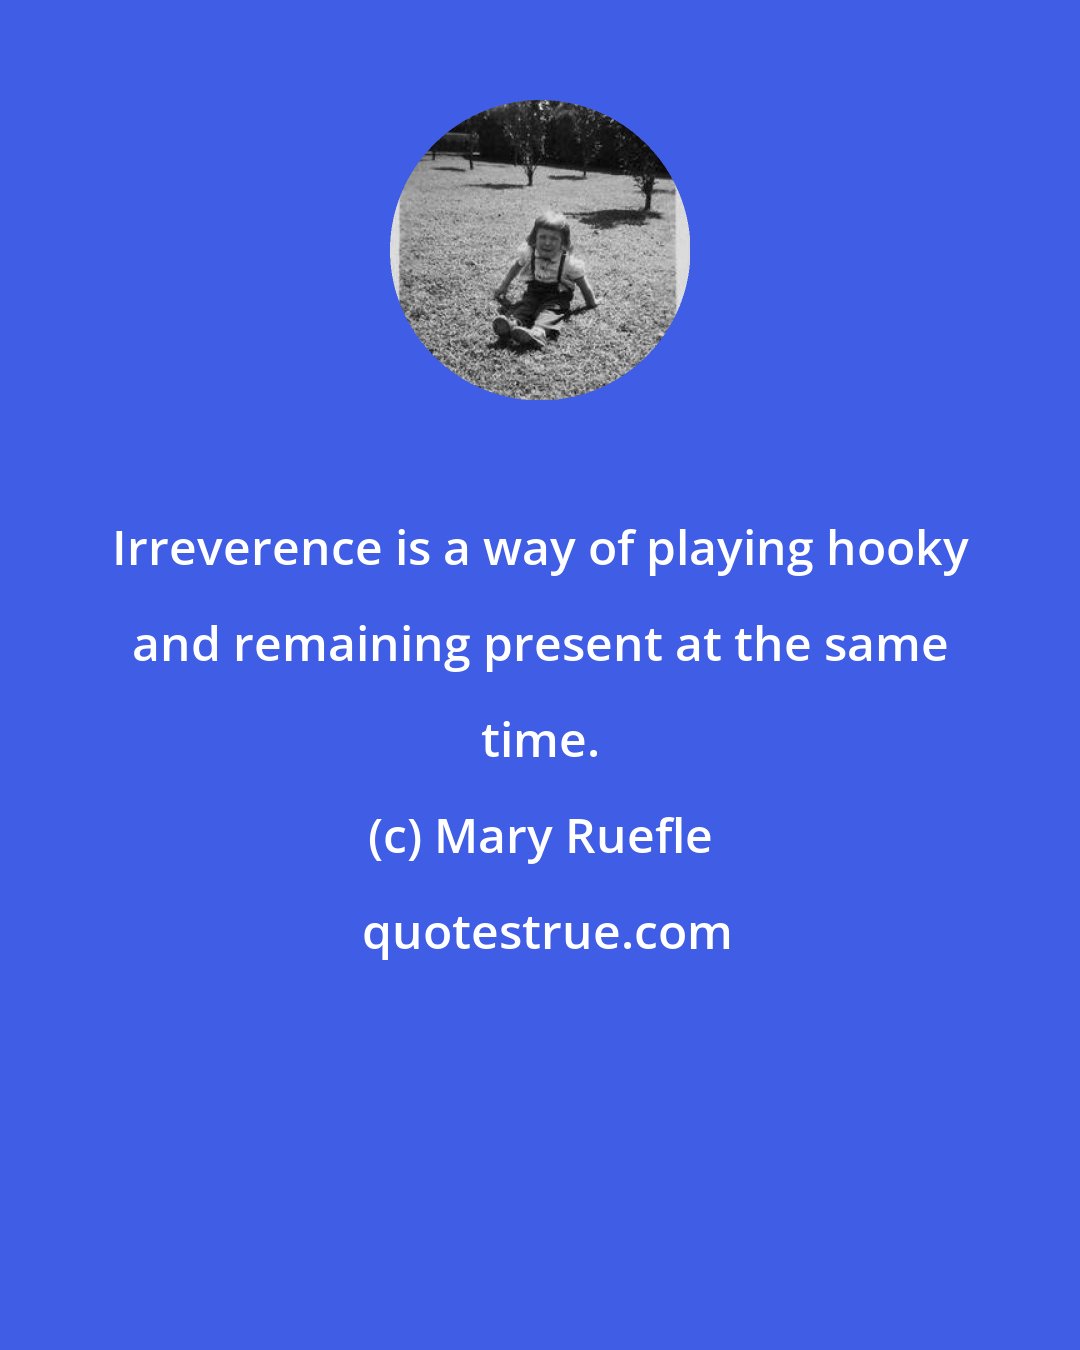 Mary Ruefle: Irreverence is a way of playing hooky and remaining present at the same time.